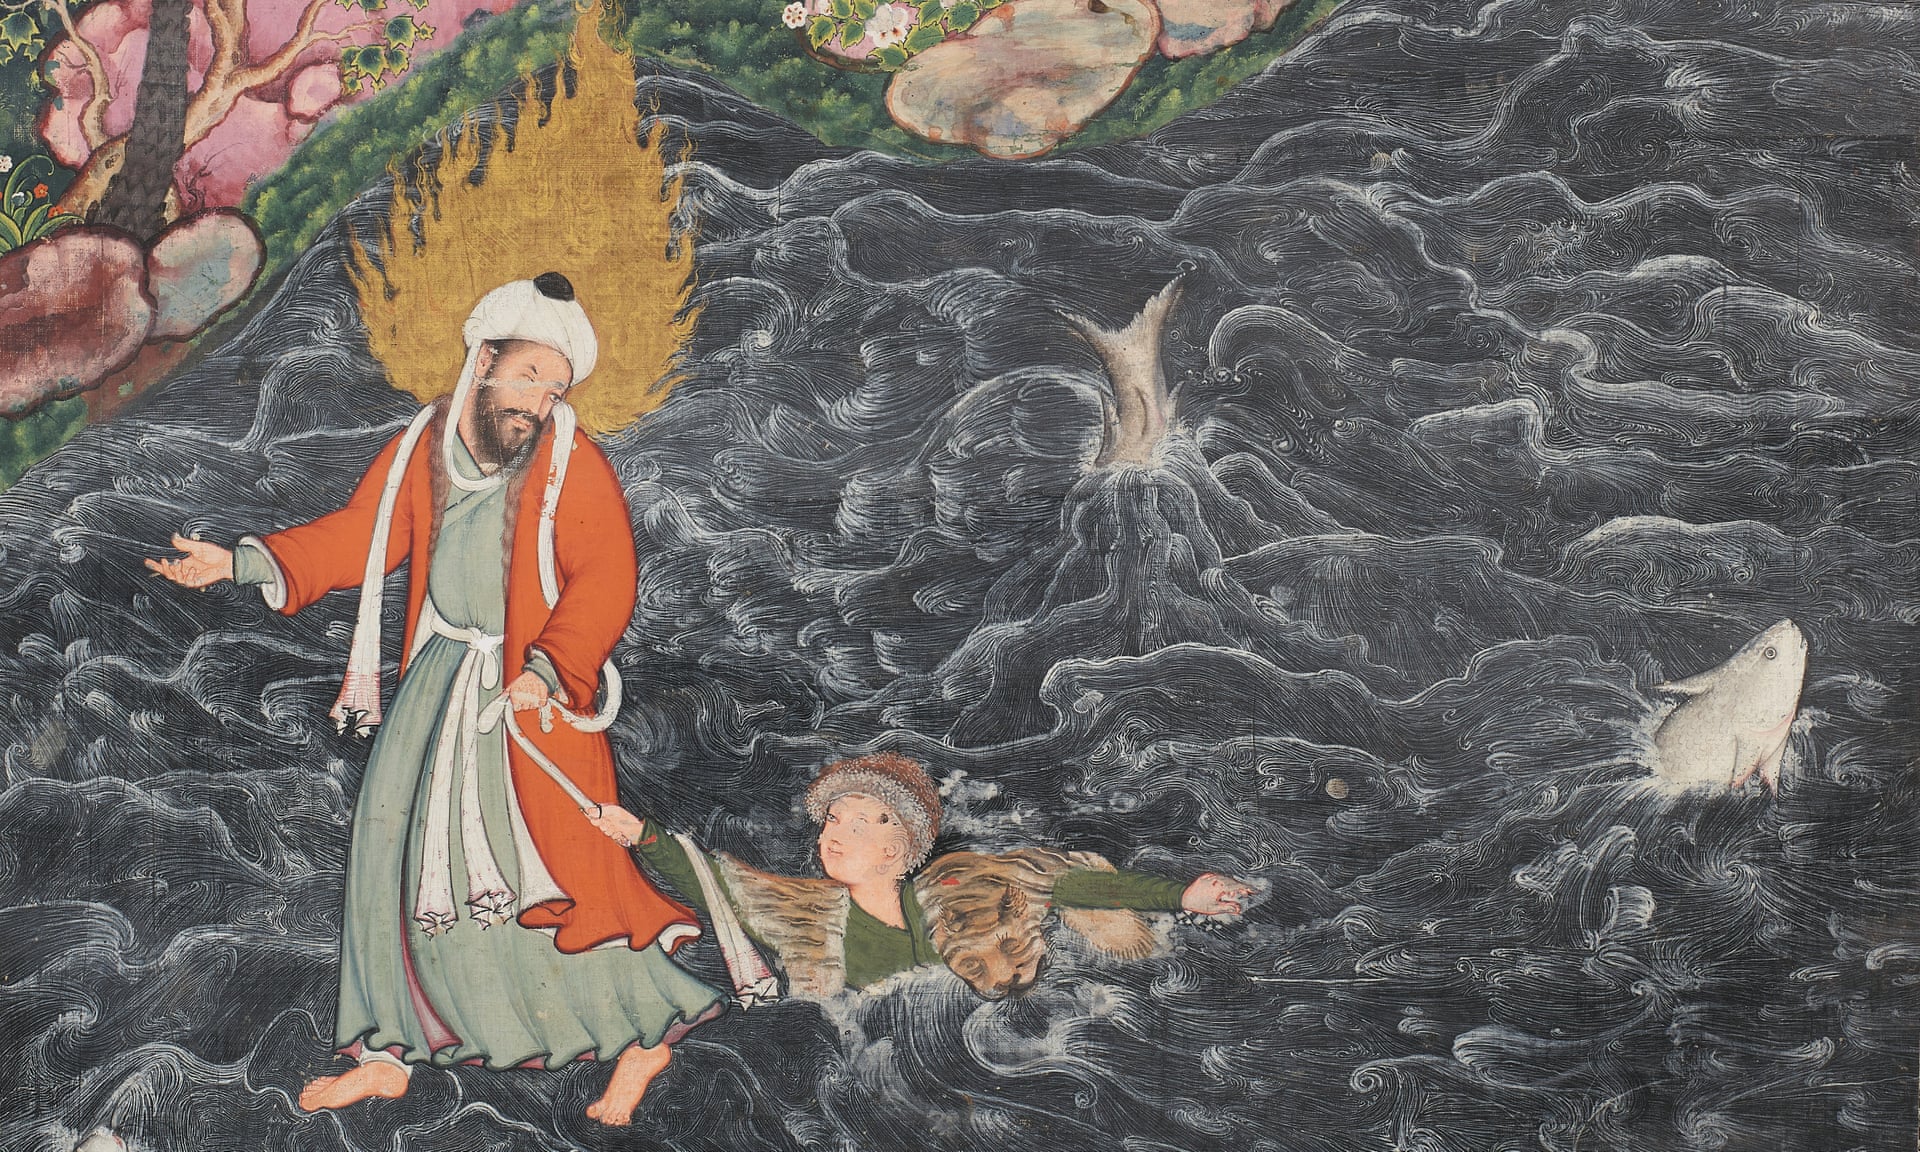 'A soaring miracle of art' – Albukhary Gallery of the Islamic World review